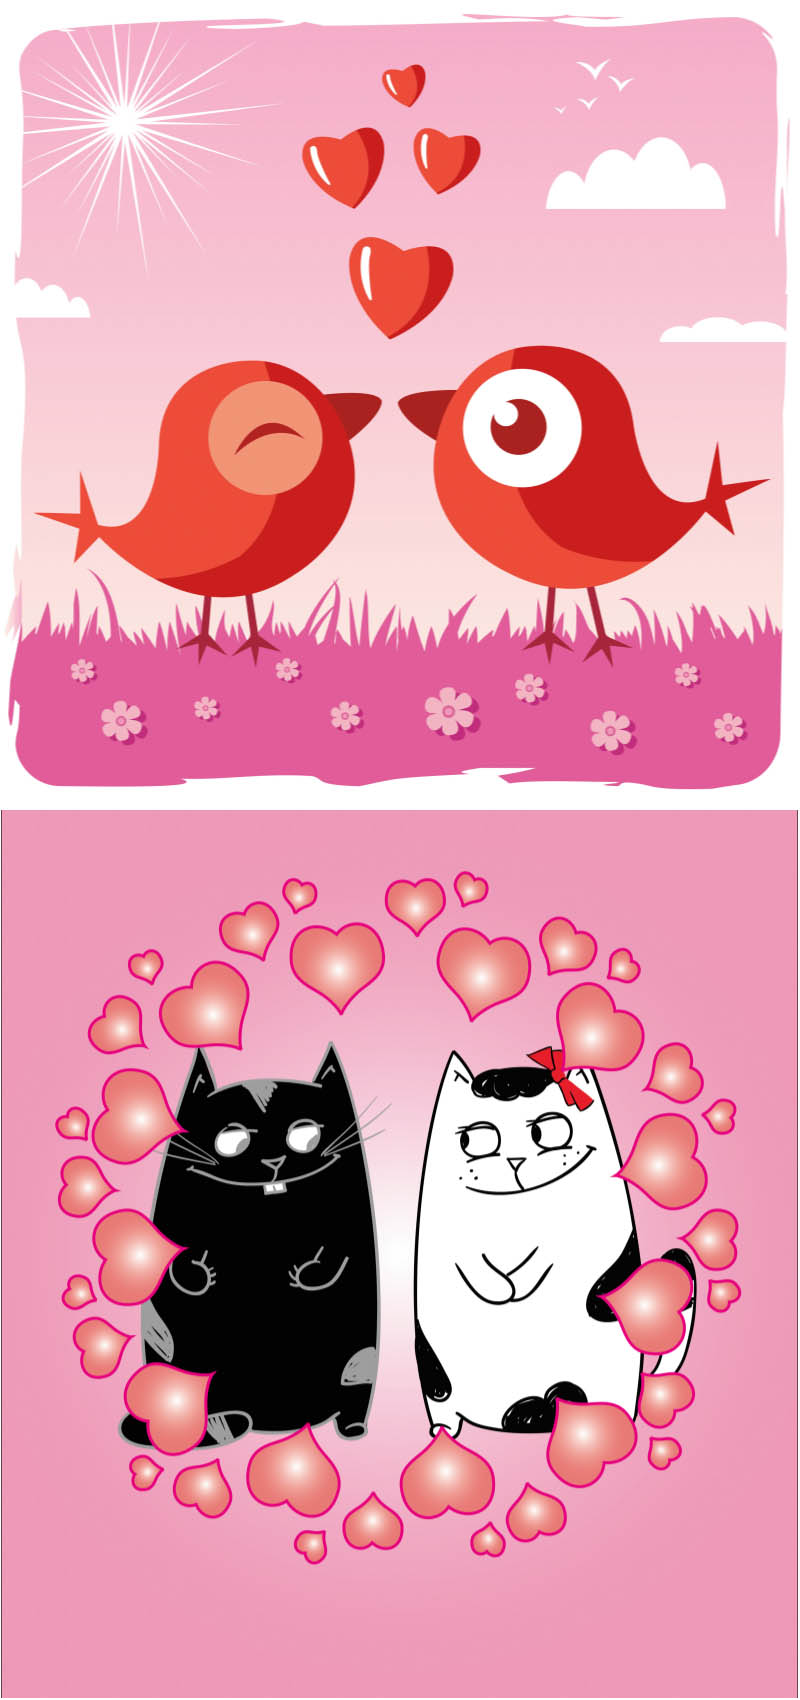 Cats and birds in love vector